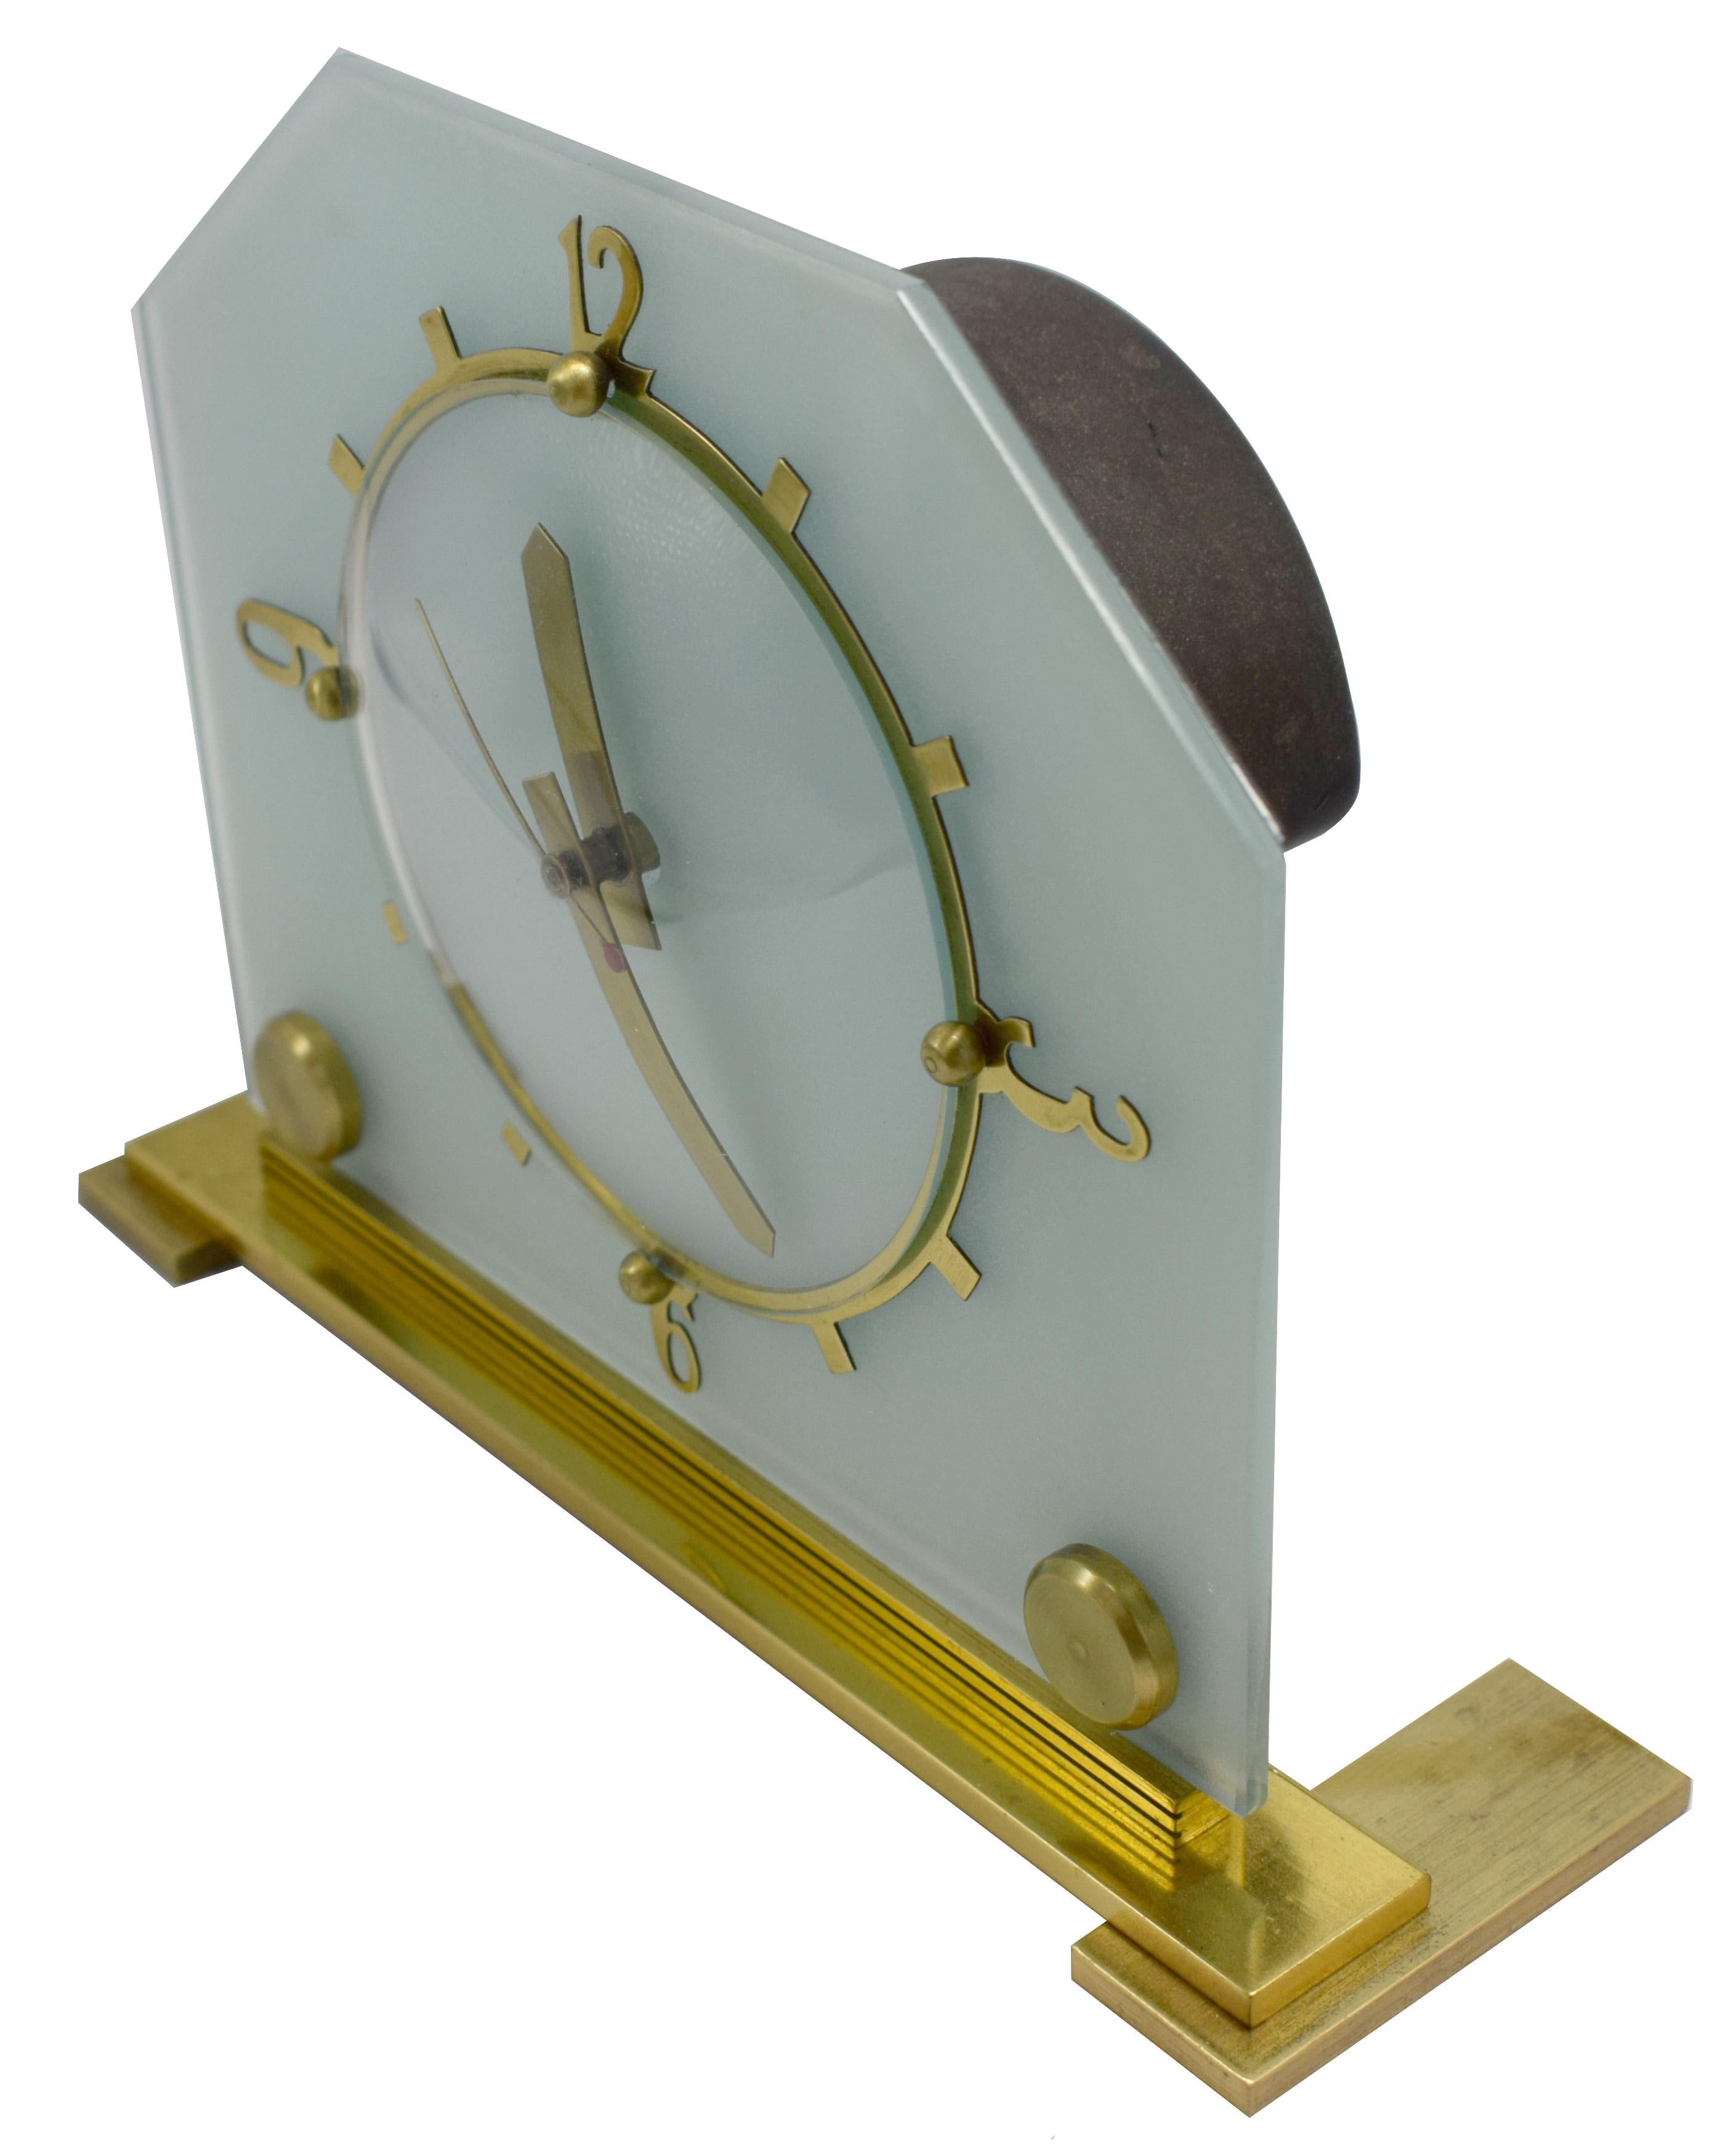 Stylish 1930s Art Deco Mantle Clock by Goblin In Excellent Condition In Devon, England